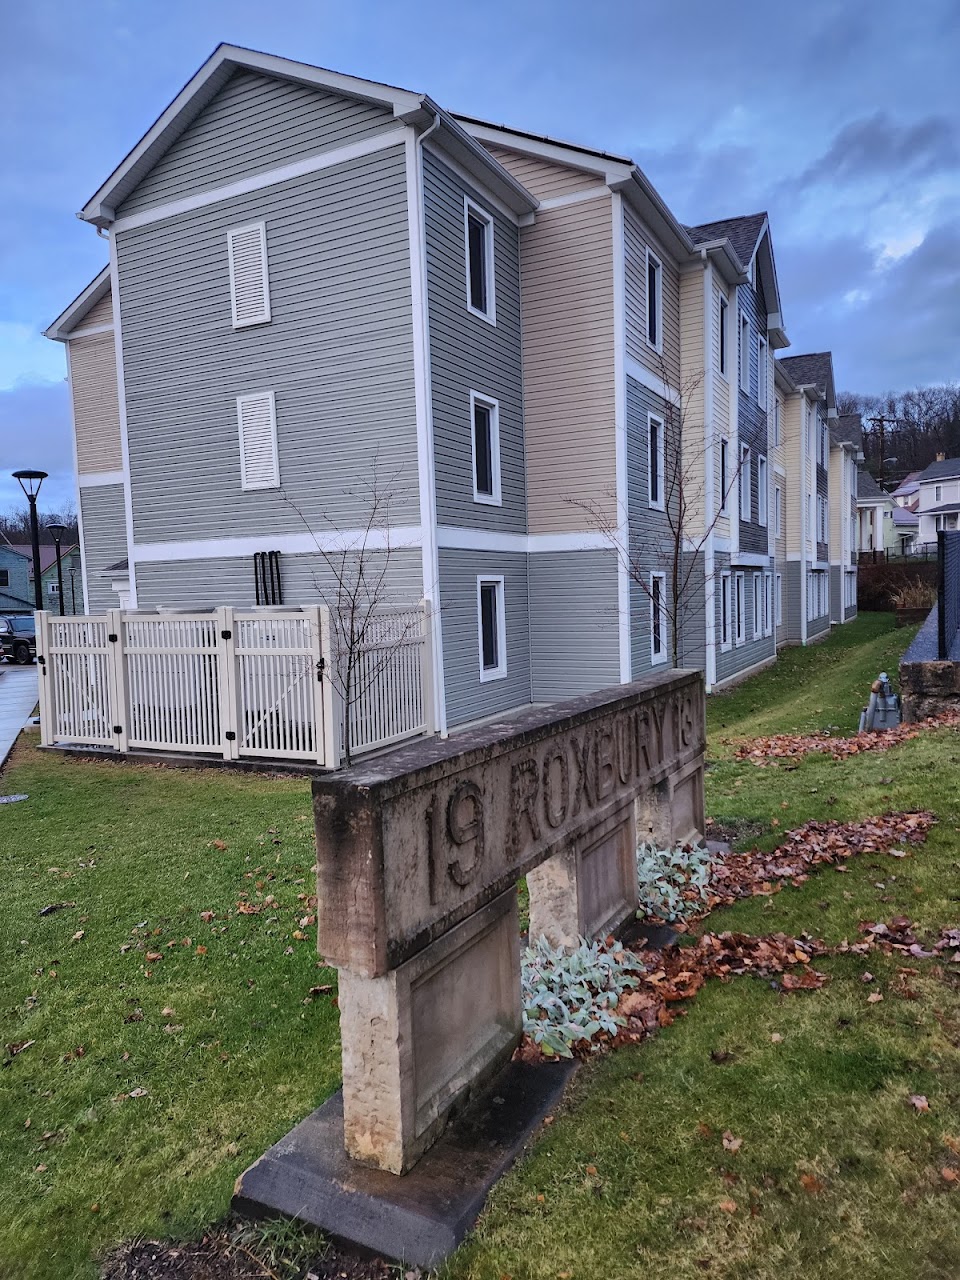 Photo of ROXBURY PLACE at 1308 FRANKLIN ST JOHNSTOWN, PA 15905